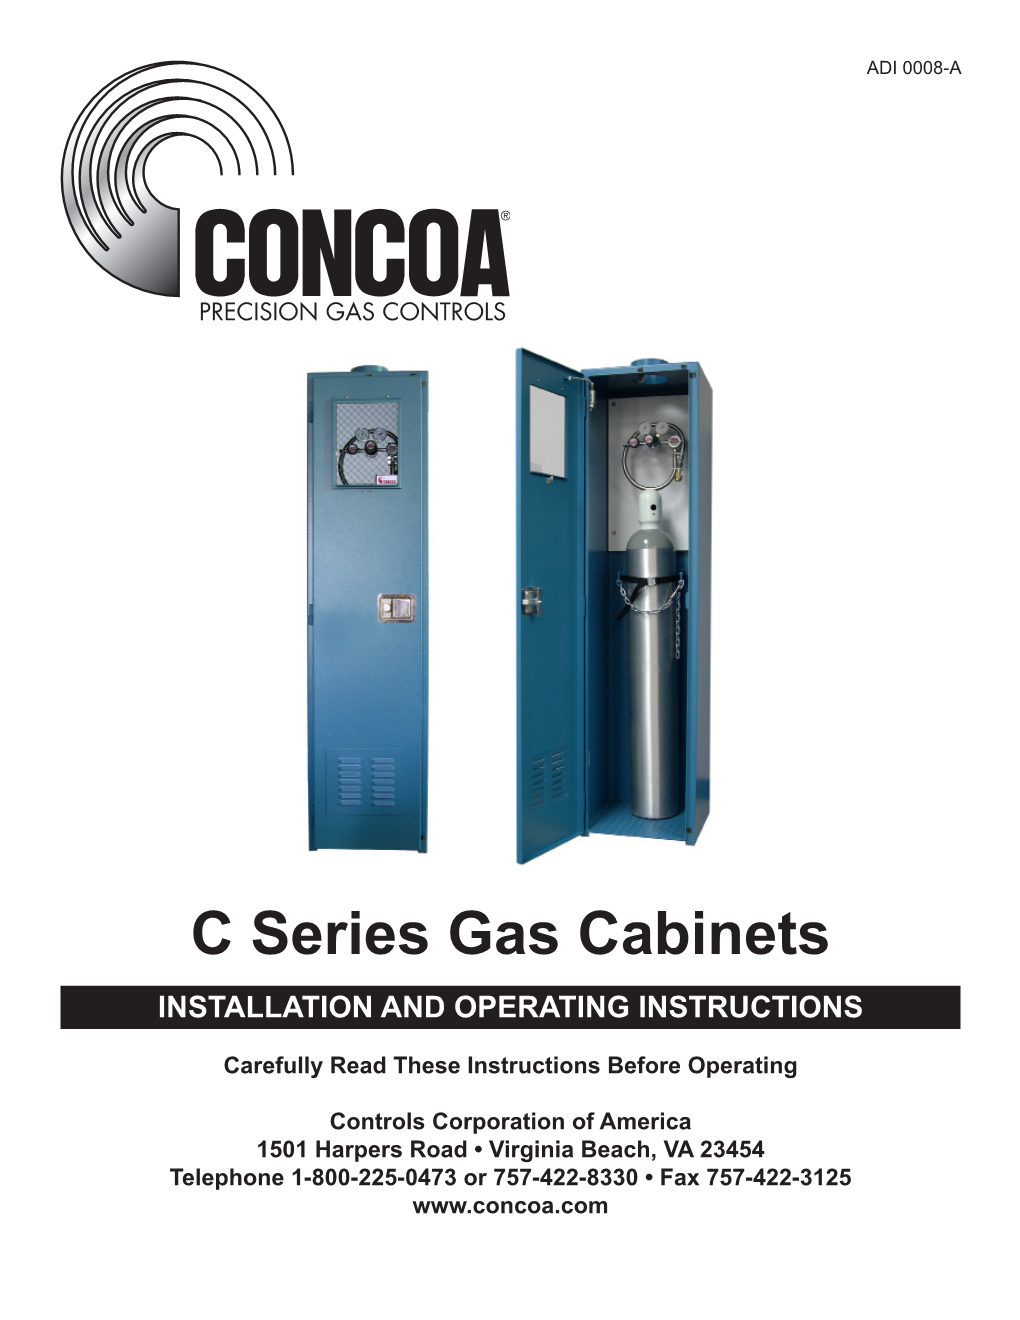 C Series Gas Cabinets INSTALLATION and OPERATING INSTRUCTIONS